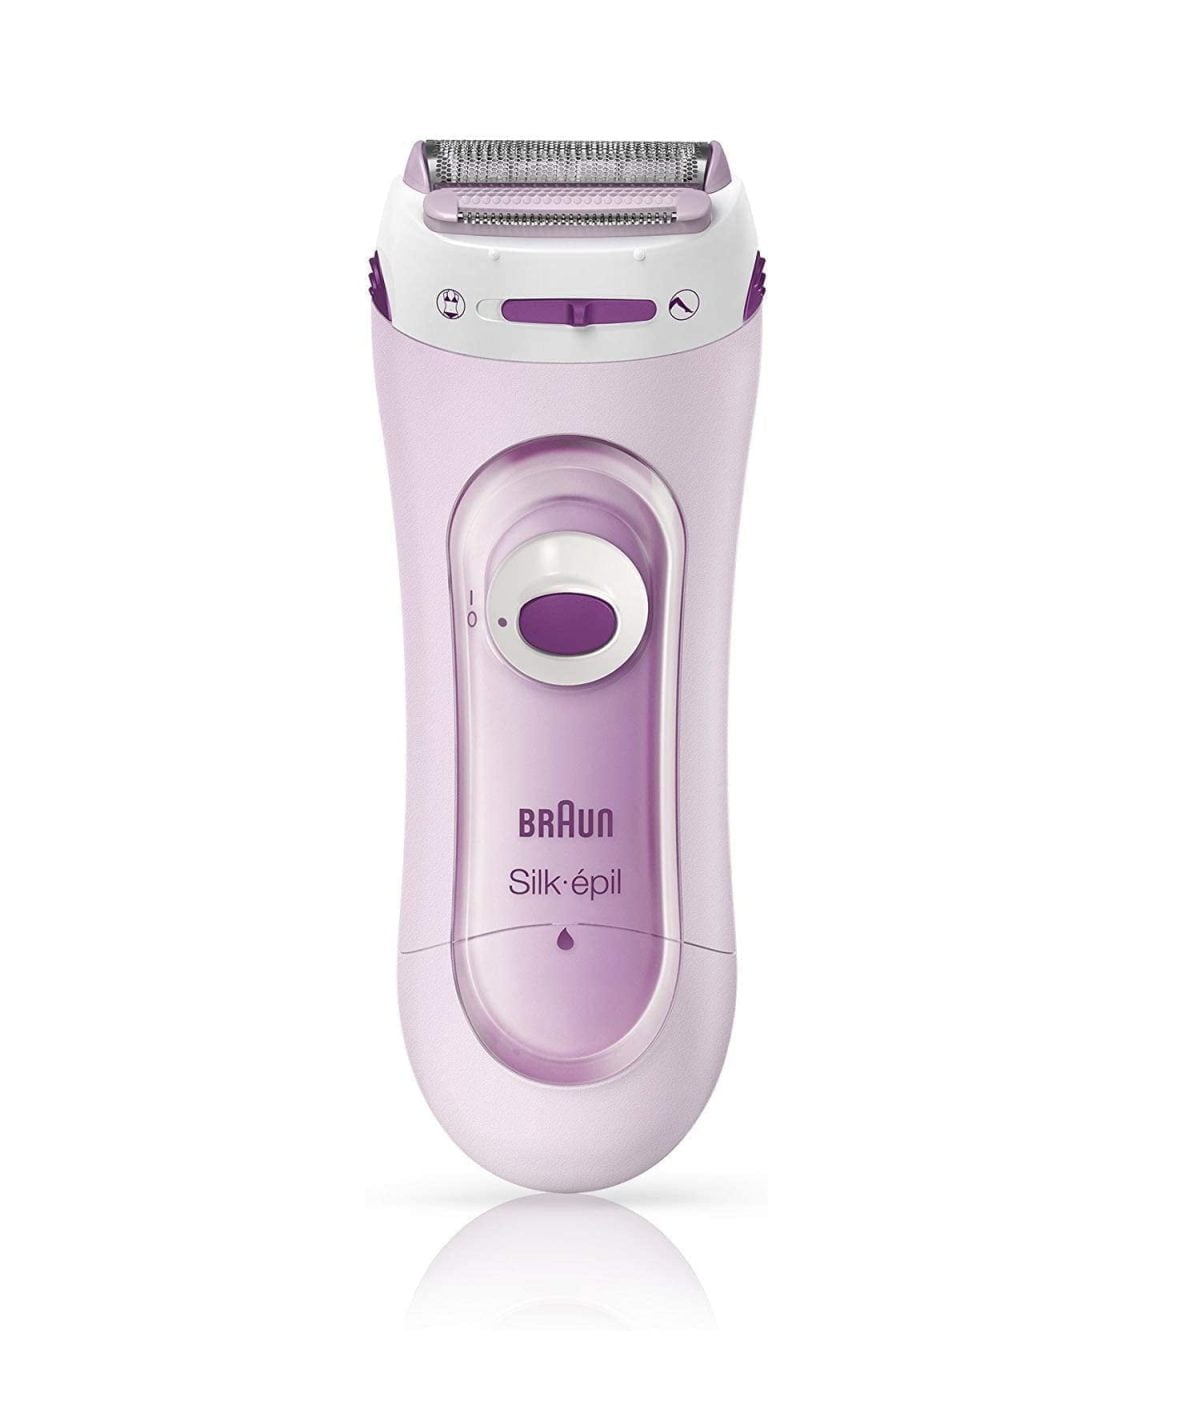 Braun &Lt;H1&Gt;Braun Silk-Épil Lady Shaver 5-103 - Cordless Electric Shaver And Trimmer System&Lt;/H1&Gt; Https://Www.youtube.com/Watch?V=2Fxya7Wkq6O &Lt;Ul Class=&Quot;A-Unordered-List A-Vertical A-Spacing-Mini&Quot;&Gt; &Lt;Li&Gt;&Lt;Span Class=&Quot;A-List-Item&Quot;&Gt; Cordless Electric Lady Shaver &Lt;/Span&Gt;&Lt;/Li&Gt; &Lt;Li&Gt;&Lt;Span Class=&Quot;A-List-Item&Quot;&Gt; Floating Foil And Trimmer For A Close Shave On Legs, Underarms Or Bikini Line &Lt;/Span&Gt;&Lt;/Li&Gt; &Lt;Li&Gt;&Lt;Span Class=&Quot;A-List-Item&Quot;&Gt; Rounded Head Adapts To Body Contours &Lt;/Span&Gt;&Lt;/Li&Gt; &Lt;Li&Gt;&Lt;Span Class=&Quot;A-List-Item&Quot;&Gt; 1 Extra: Trimmer Cap For Bikini Line And Sensitive Areas &Lt;/Span&Gt;&Lt;/Li&Gt; &Lt;Li&Gt;&Lt;Span Class=&Quot;A-List-Item&Quot;&Gt; 2Xaa Batteries Are Included &Lt;/Span&Gt;&Lt;/Li&Gt; &Lt;/Ul&Gt; Braun Lady Shaver Braun Silk-Épil Lady Shaver Ls 5100 - Cordless Electric Shaver And Trimmer System